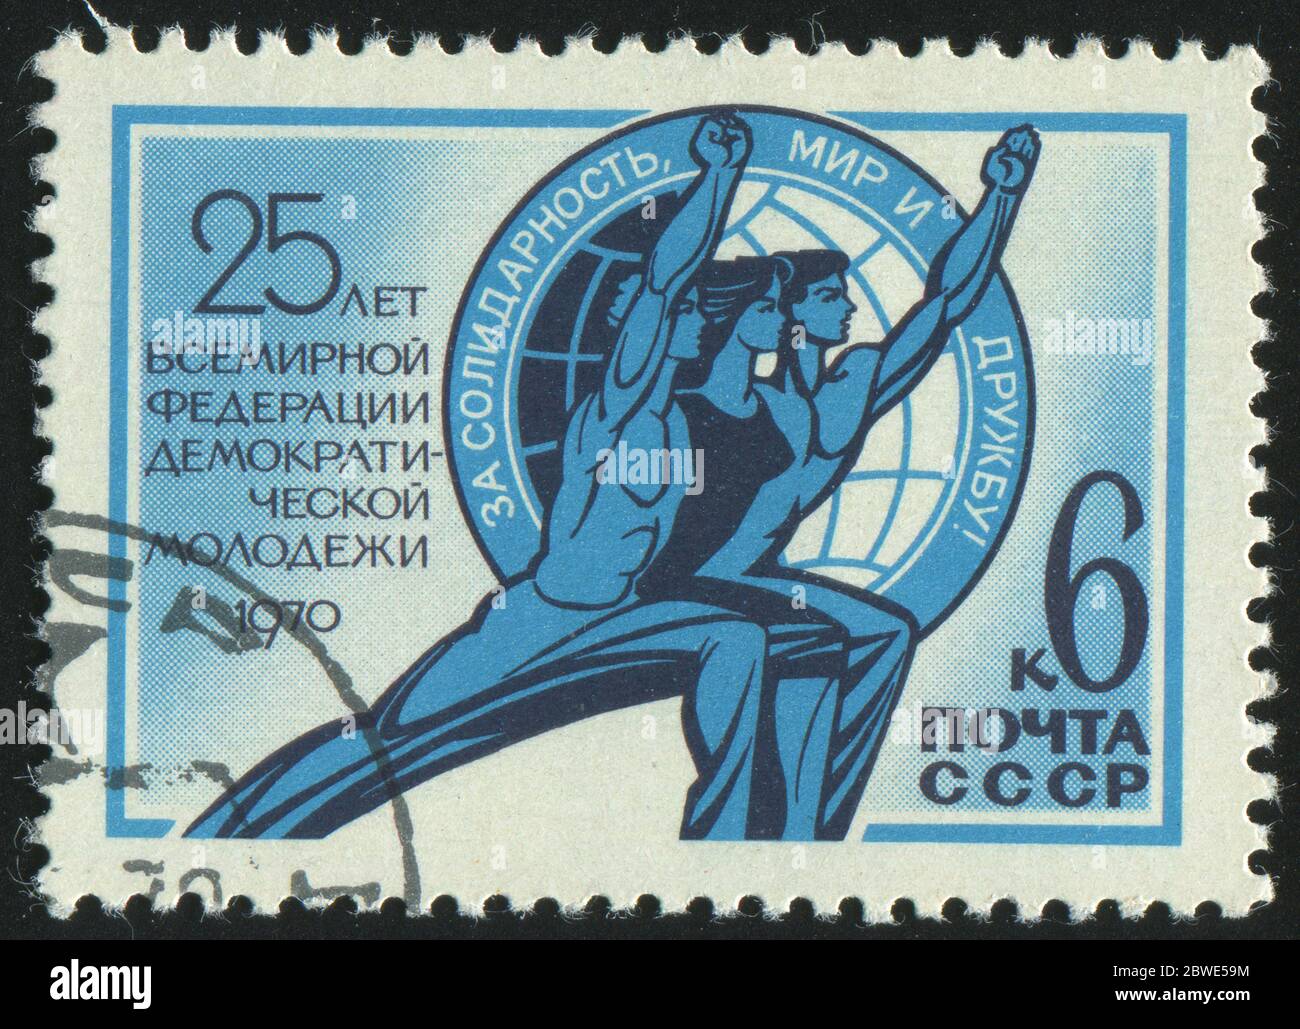 RUSSIA - CIRCA 1970: stamp printed by Russia, shows 25th anniversary of the World Federation of Democratic Youth, circa 1970. Stock Photo